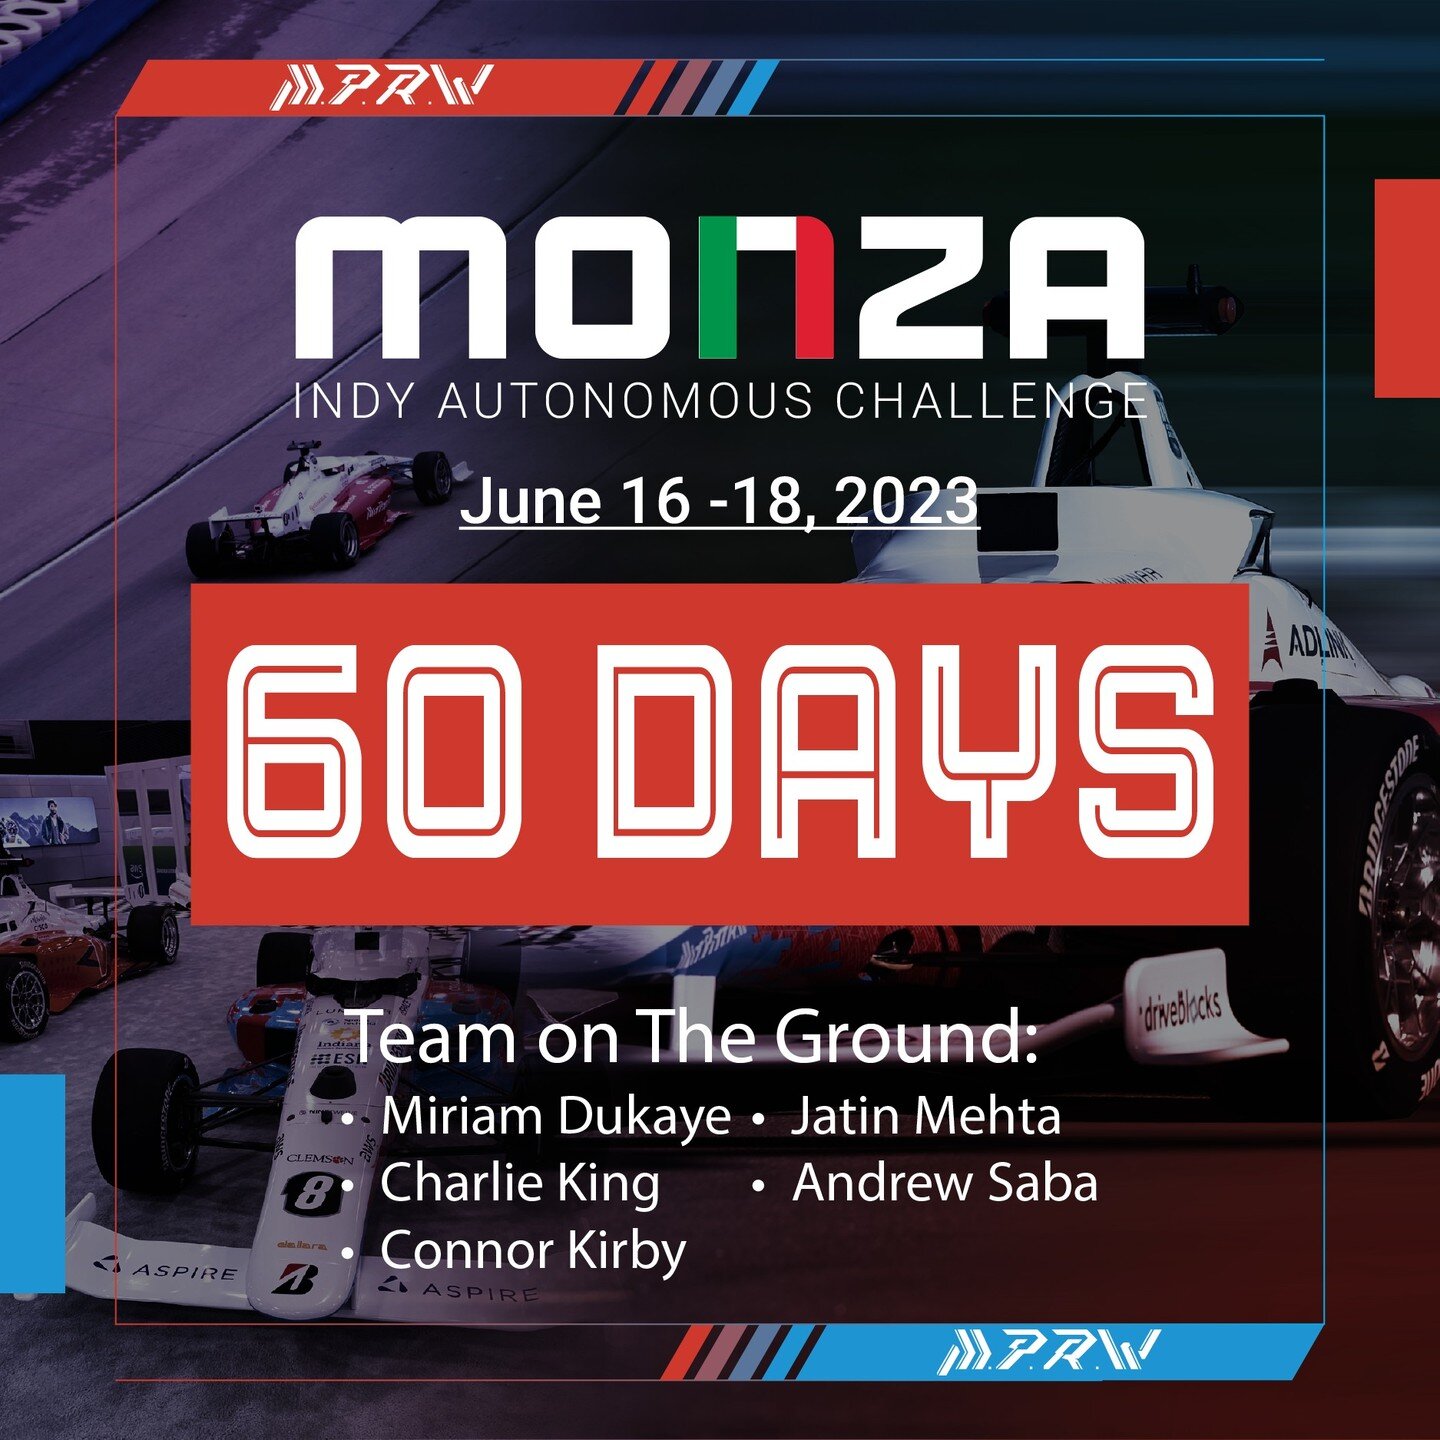 It's time to start the countdown for our upcoming race as part of the @indyachallenge at the historic @autodromonazionale_monza track. Stay posted for live updates as we prepare for the race!

@mitdriverless 
@pittofficial 
@watonomous 
#ritautonomou